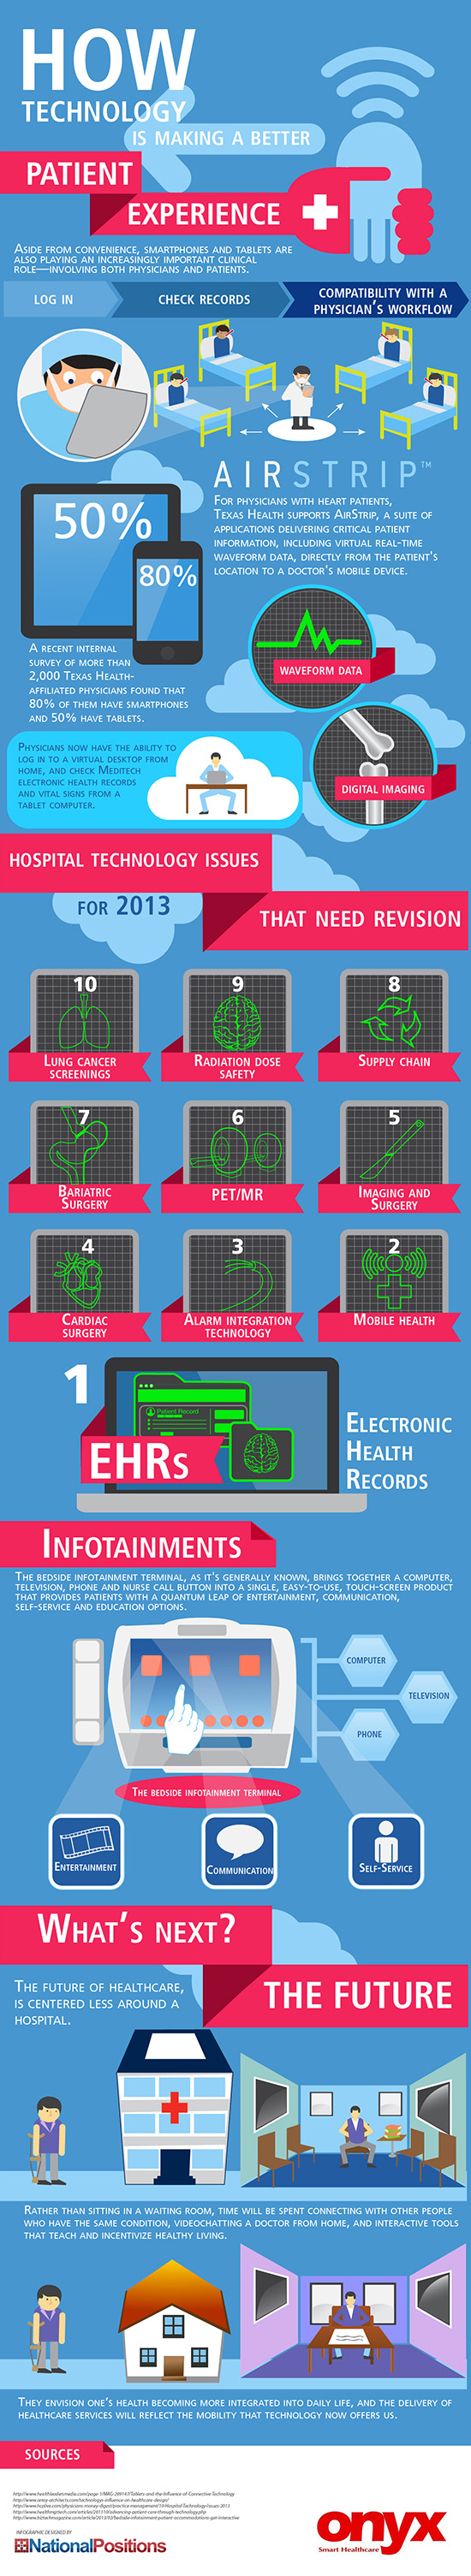 [Infographic] How Technology is making a better patient experience